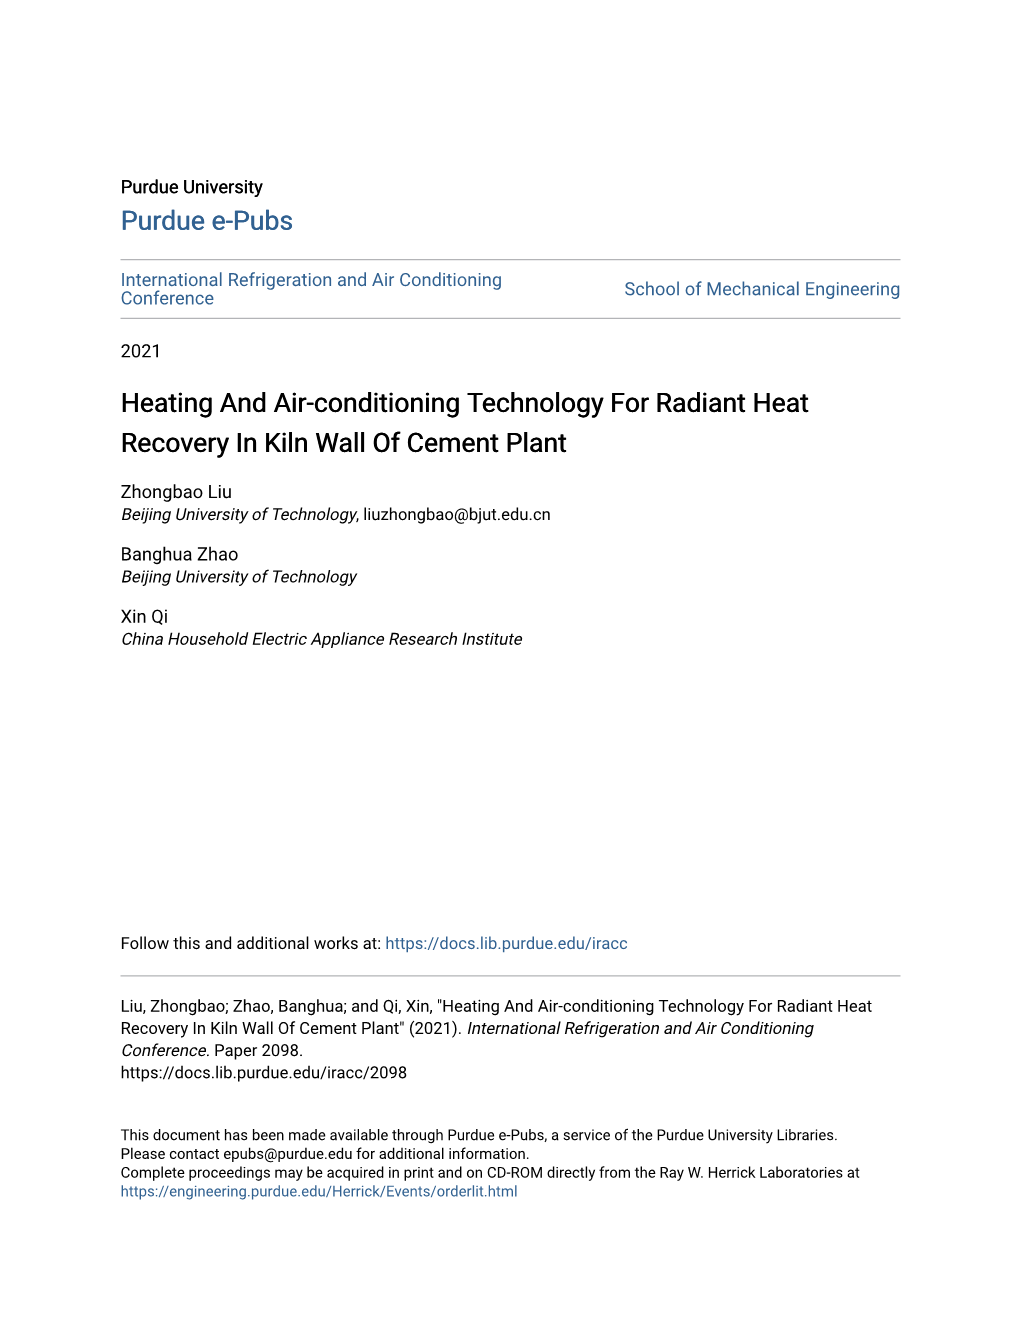 Heating and Air-Conditioning Technology for Radiant Heat Recovery in Kiln Wall of Cement Plant